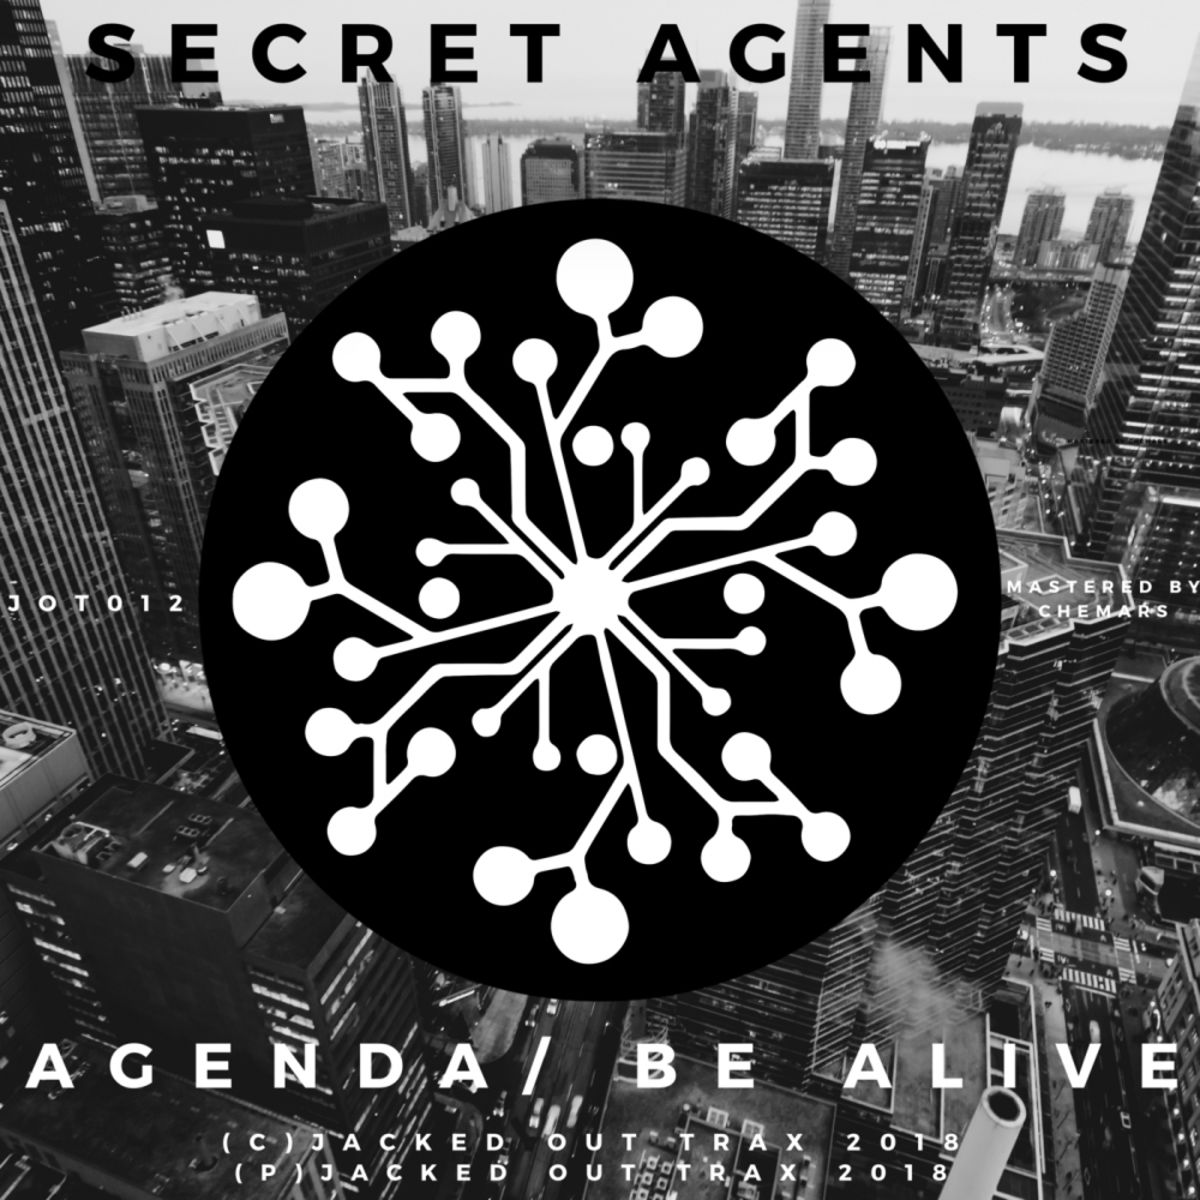 Secret Agents - Agenda/ Be Alive / Jacked Out Trax